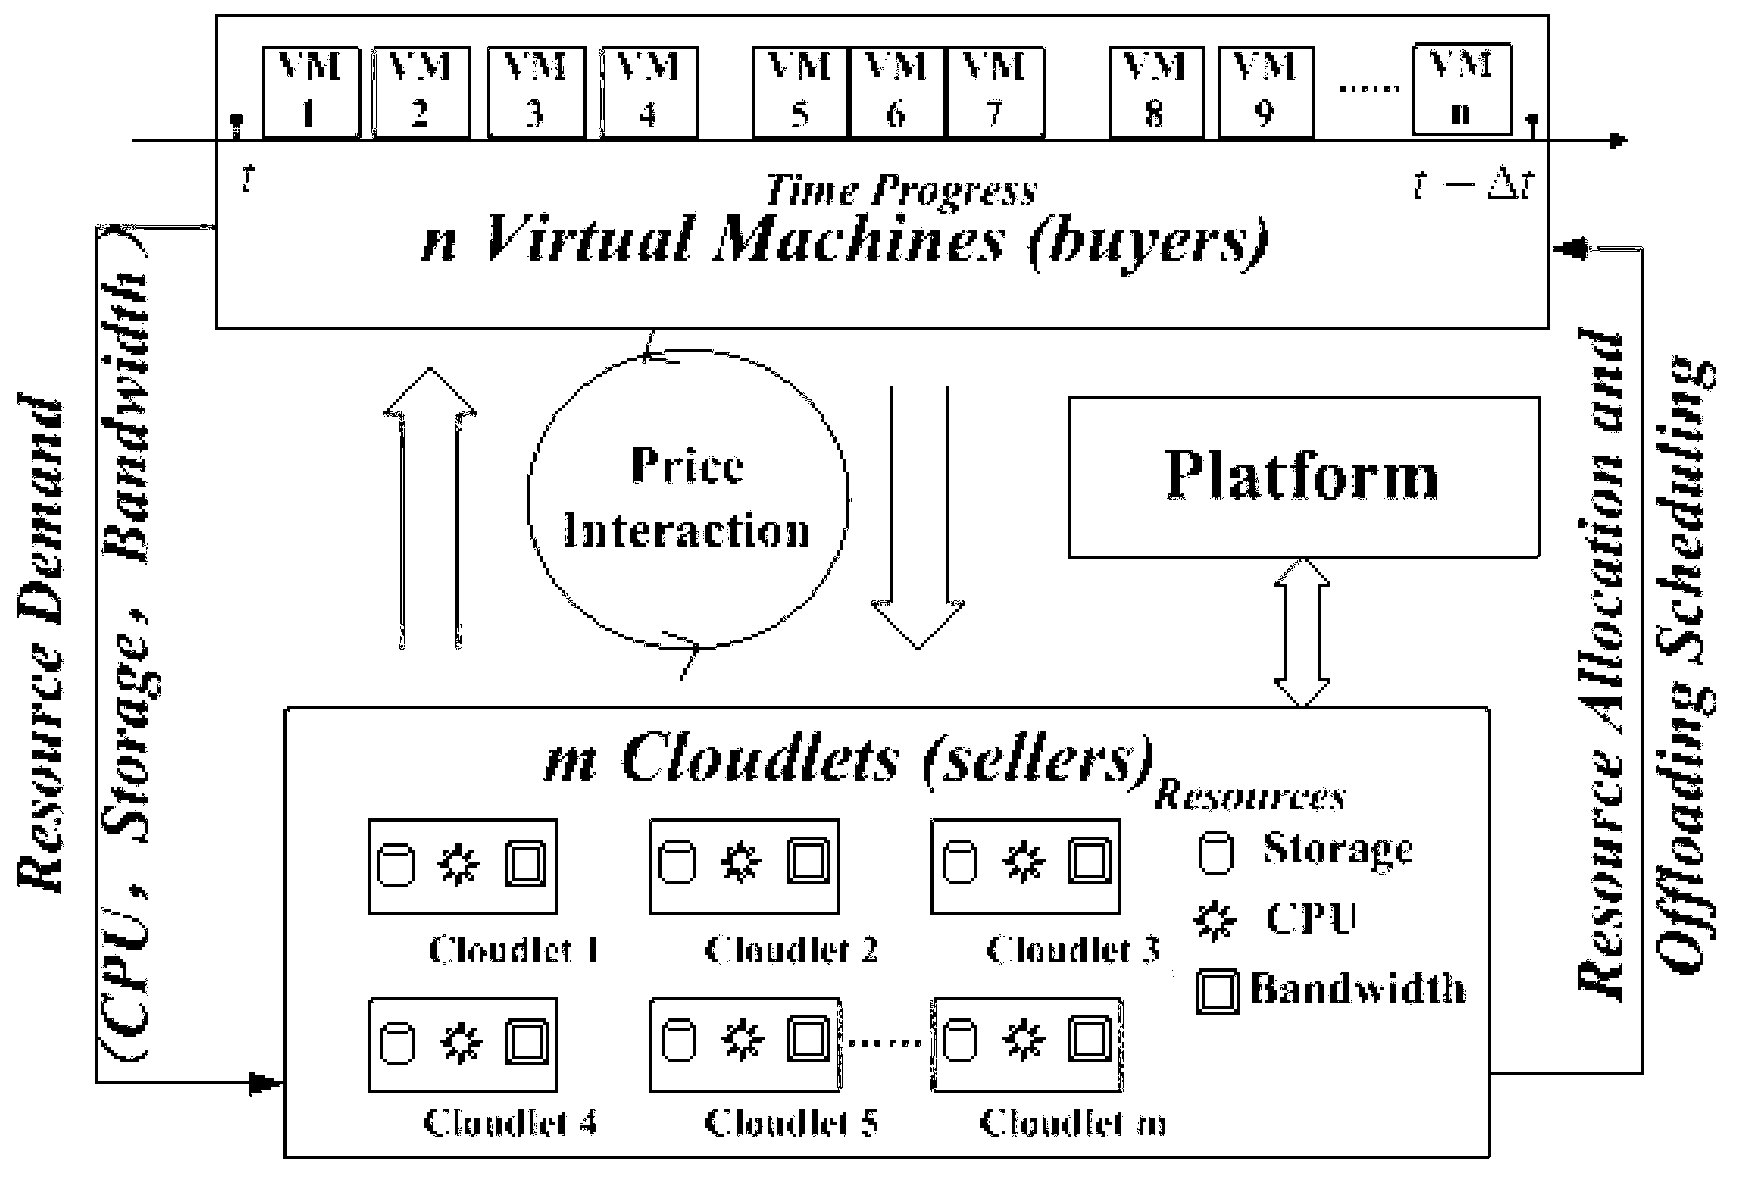 Multi-dimensional resource pricing method in mobile cloud computing environment based on bilateral market